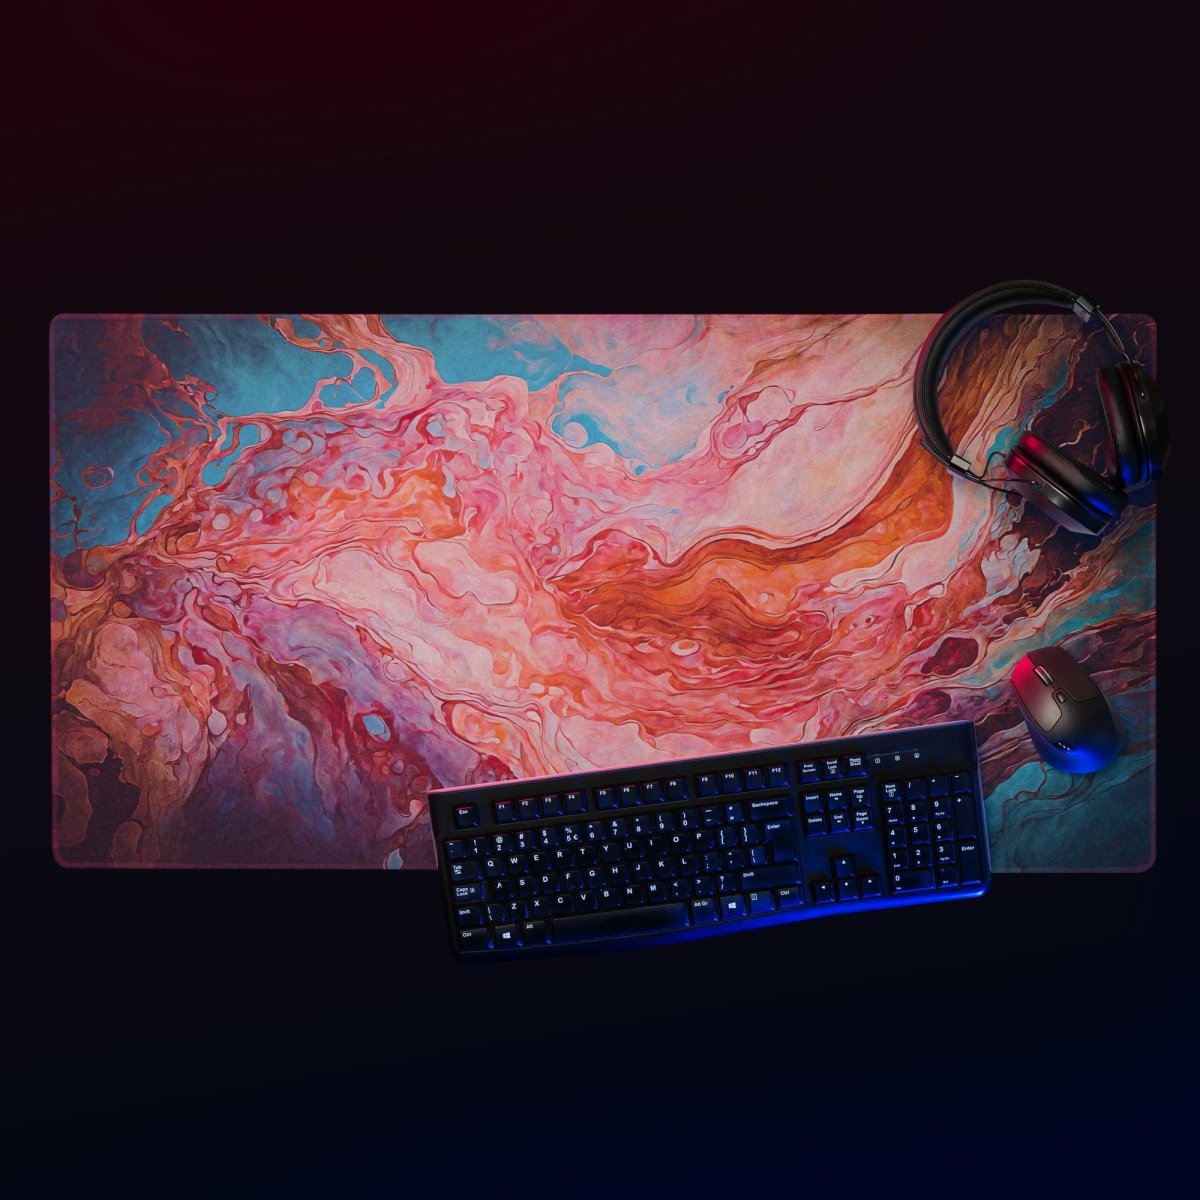 Marbled rhapsody - Gaming mouse pad - Ever colorful